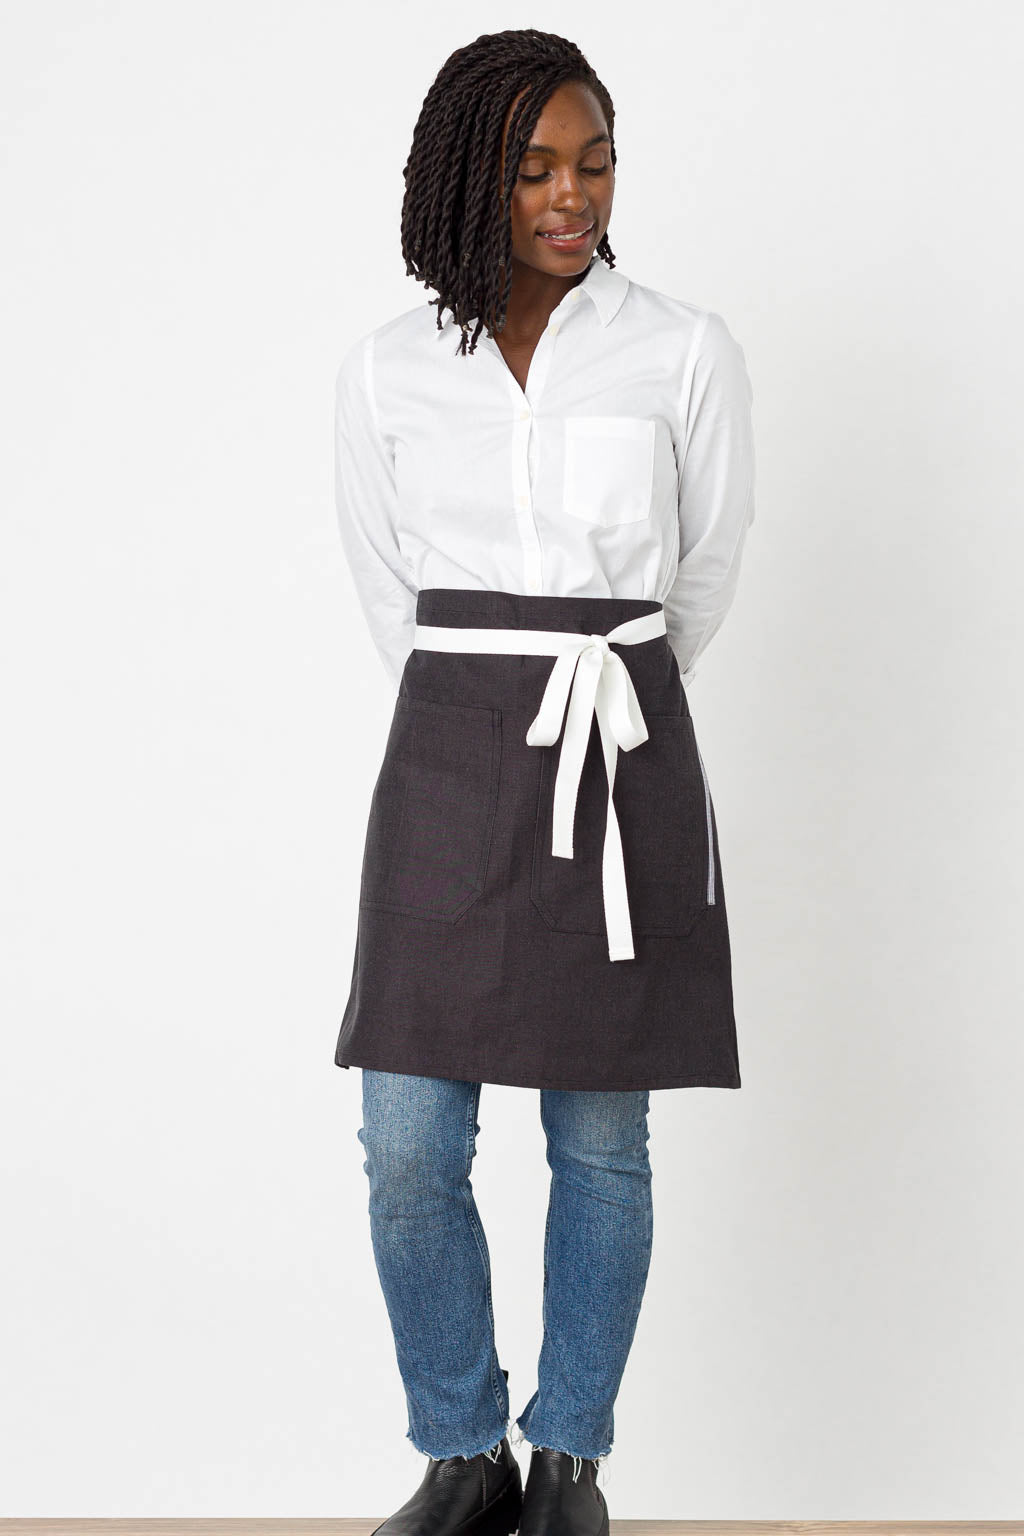 Bistro Middly Apron, Wrinkle Resistant, 20"L, Charcoal Black with White Straps, Poly-Cotton